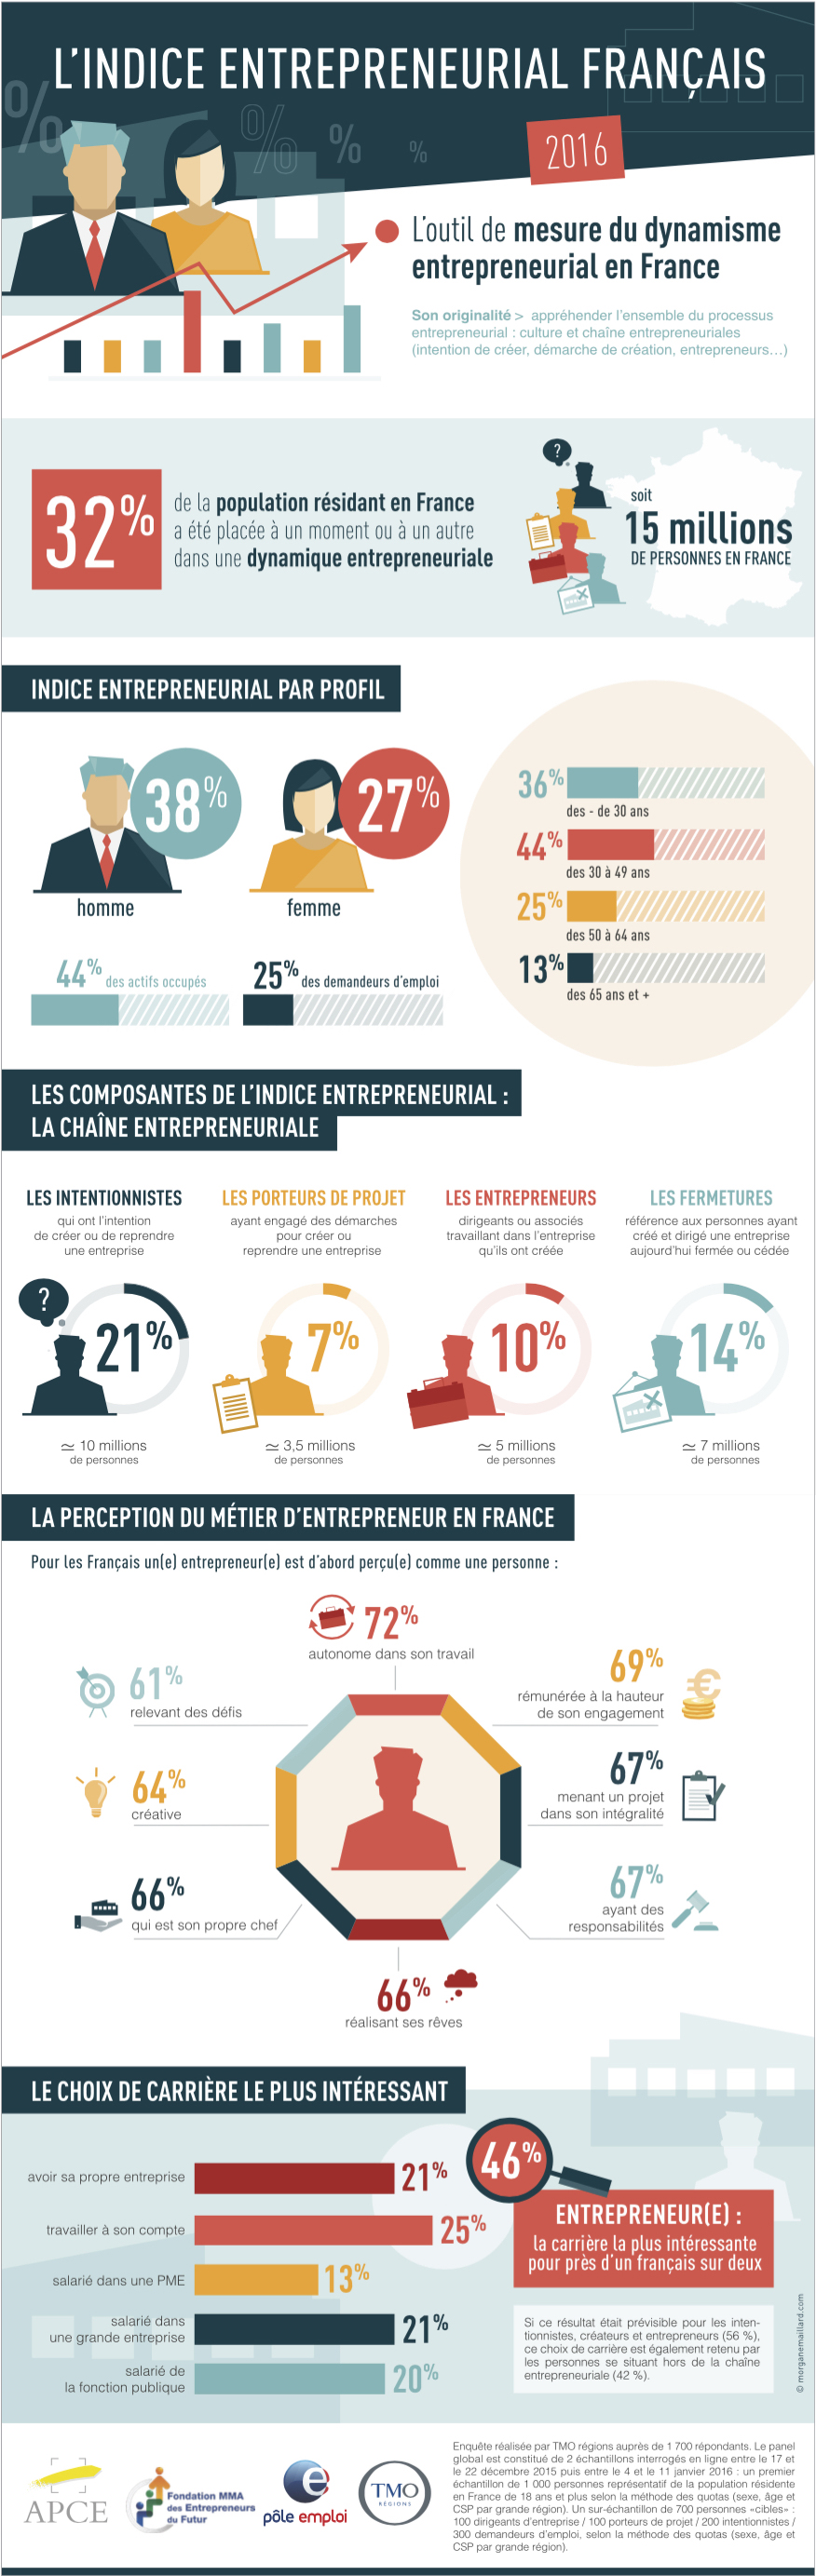 infographie indice entrepreneurial